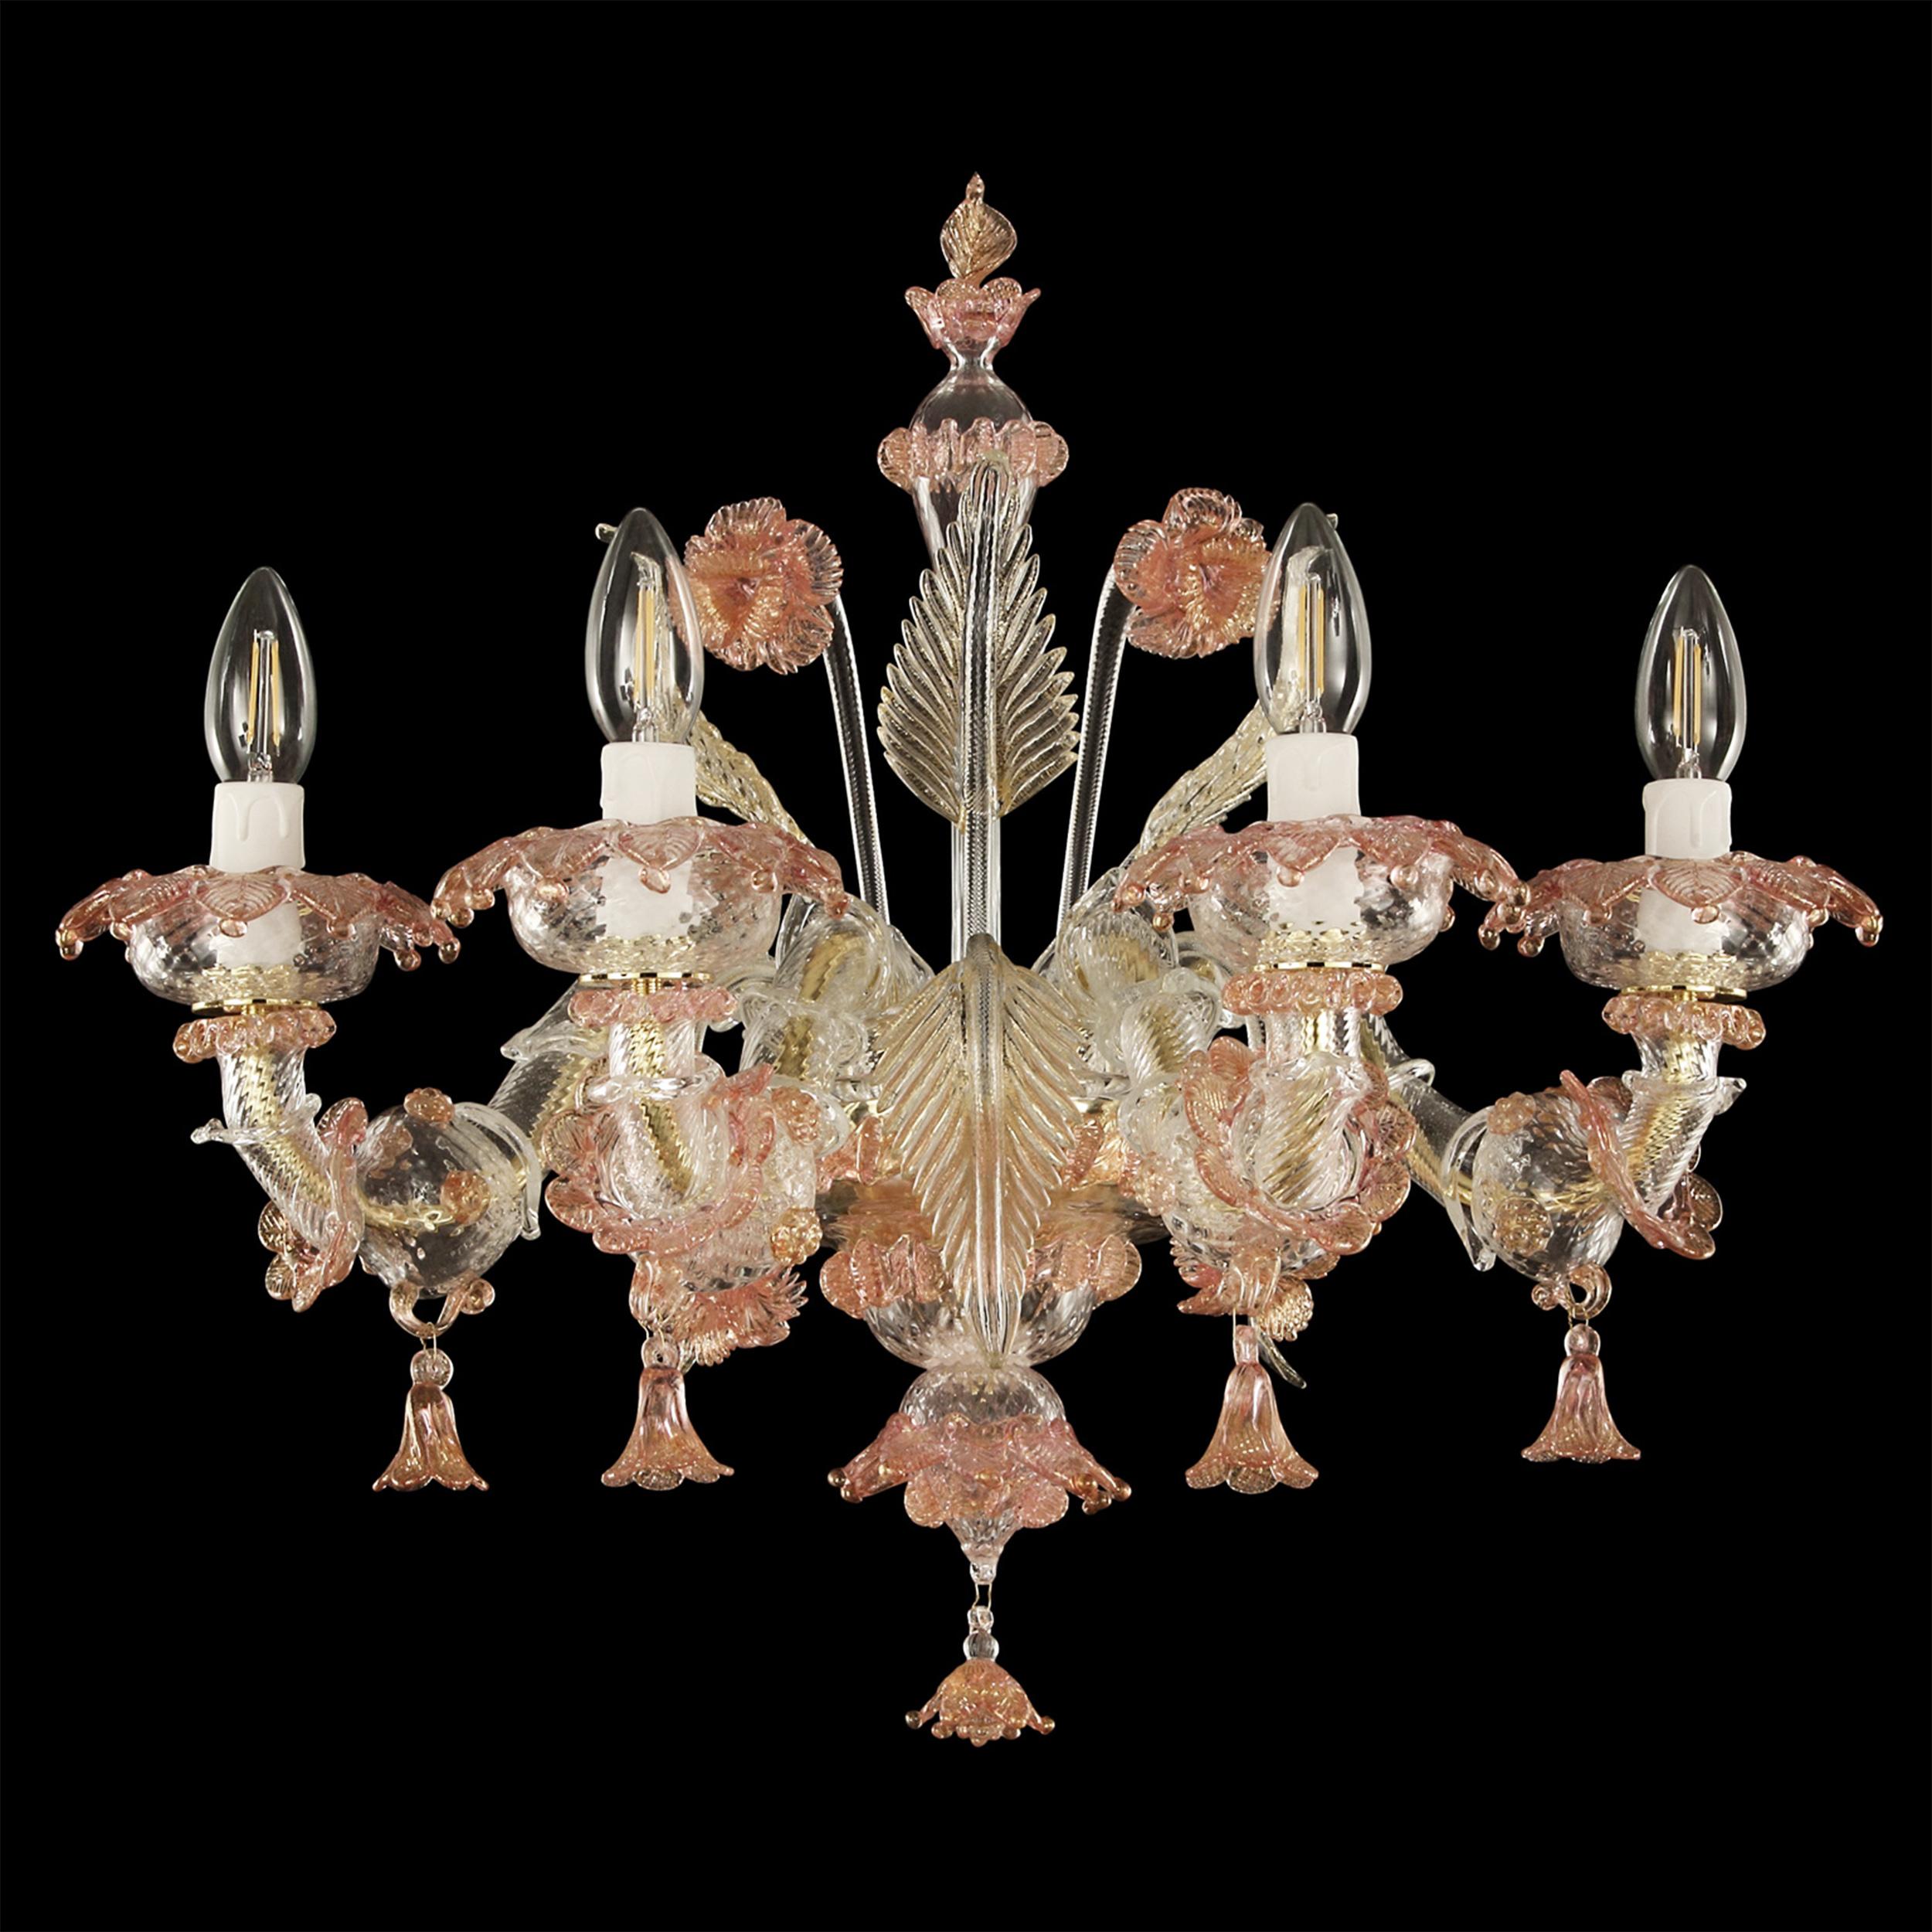 The Murano glass sconce in Rezzonico style is a romantic lighting work, inspired from the luxurious halls of the venetian buildings on the Canal Grande.
The colors, the floral decorations, the Rezzonico arms, the pendant elements… all the